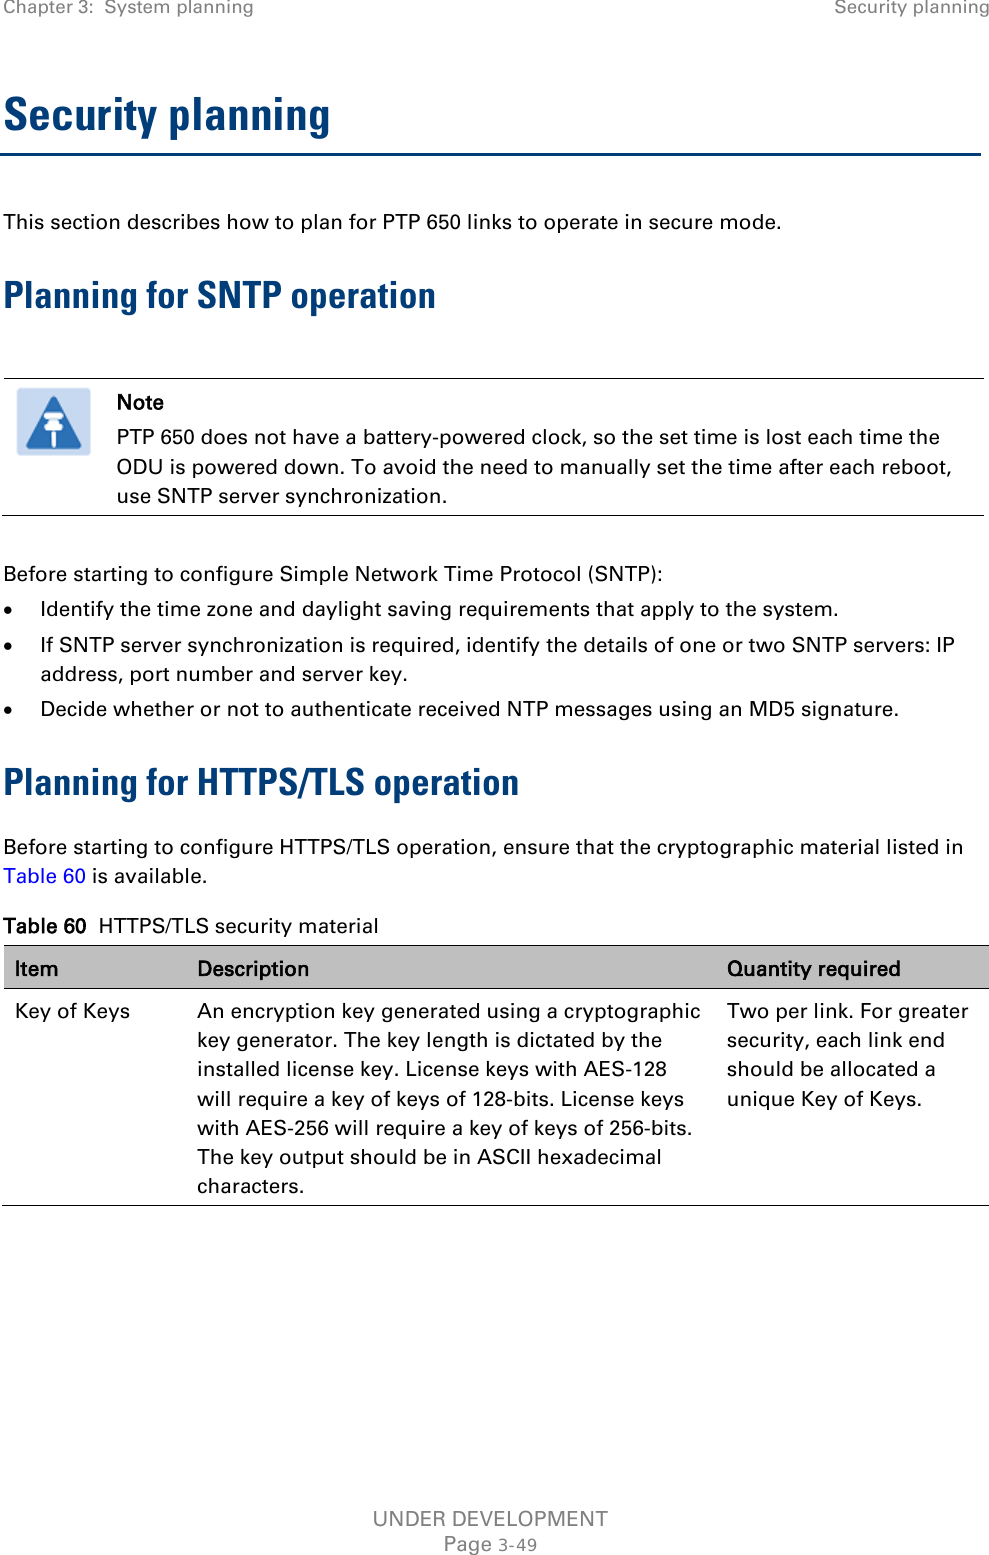 Chapter 3:  System planning Security planning  Security planning This section describes how to plan for PTP 650 links to operate in secure mode. Planning for SNTP operation   Note PTP 650 does not have a battery-powered clock, so the set time is lost each time the ODU is powered down. To avoid the need to manually set the time after each reboot, use SNTP server synchronization.  Before starting to configure Simple Network Time Protocol (SNTP): • Identify the time zone and daylight saving requirements that apply to the system. • If SNTP server synchronization is required, identify the details of one or two SNTP servers: IP address, port number and server key. • Decide whether or not to authenticate received NTP messages using an MD5 signature. Planning for HTTPS/TLS operation Before starting to configure HTTPS/TLS operation, ensure that the cryptographic material listed in Table 60 is available. Table 60  HTTPS/TLS security material Item Description Quantity required Key of Keys An encryption key generated using a cryptographic key generator. The key length is dictated by the installed license key. License keys with AES-128 will require a key of keys of 128-bits. License keys with AES-256 will require a key of keys of 256-bits. The key output should be in ASCII hexadecimal characters. Two per link. For greater security, each link end should be allocated a unique Key of Keys. UNDER DEVELOPMENT Page 3-49 